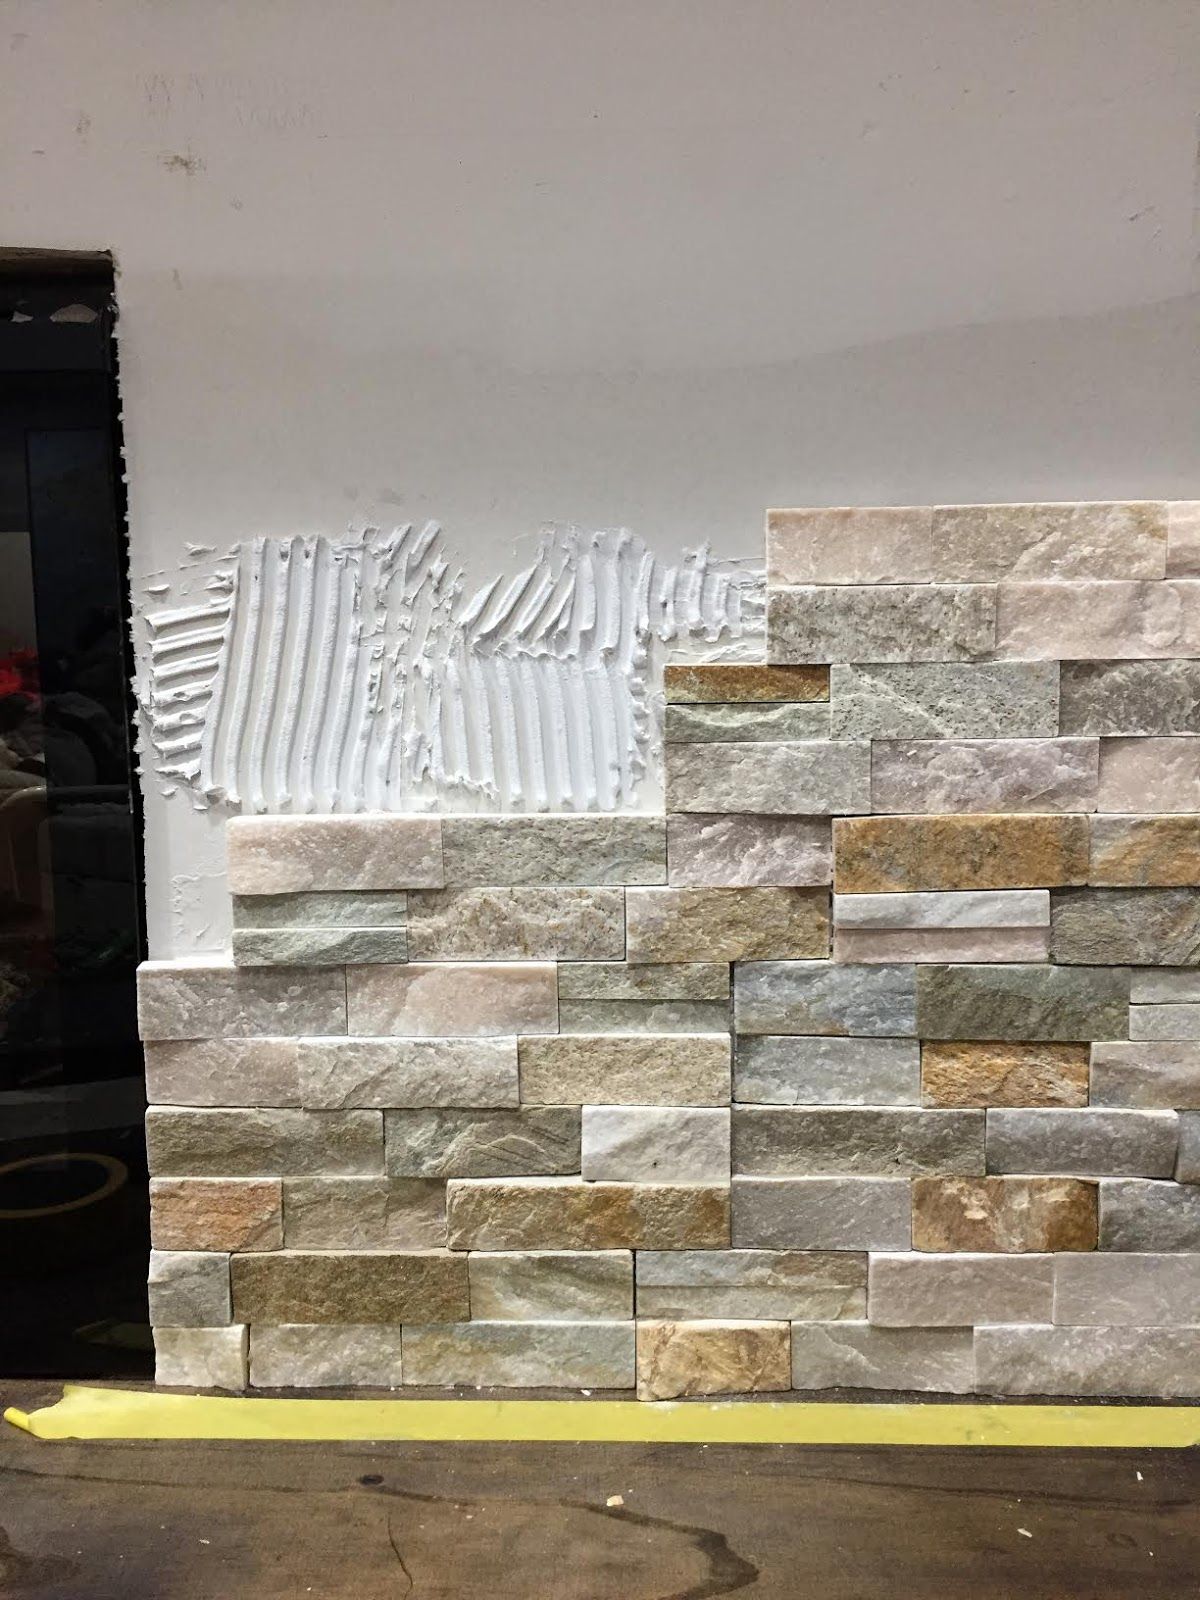 Sandstone Fireplace Inspirational How to Install Stacked Stone Tile On A Fireplace Wall